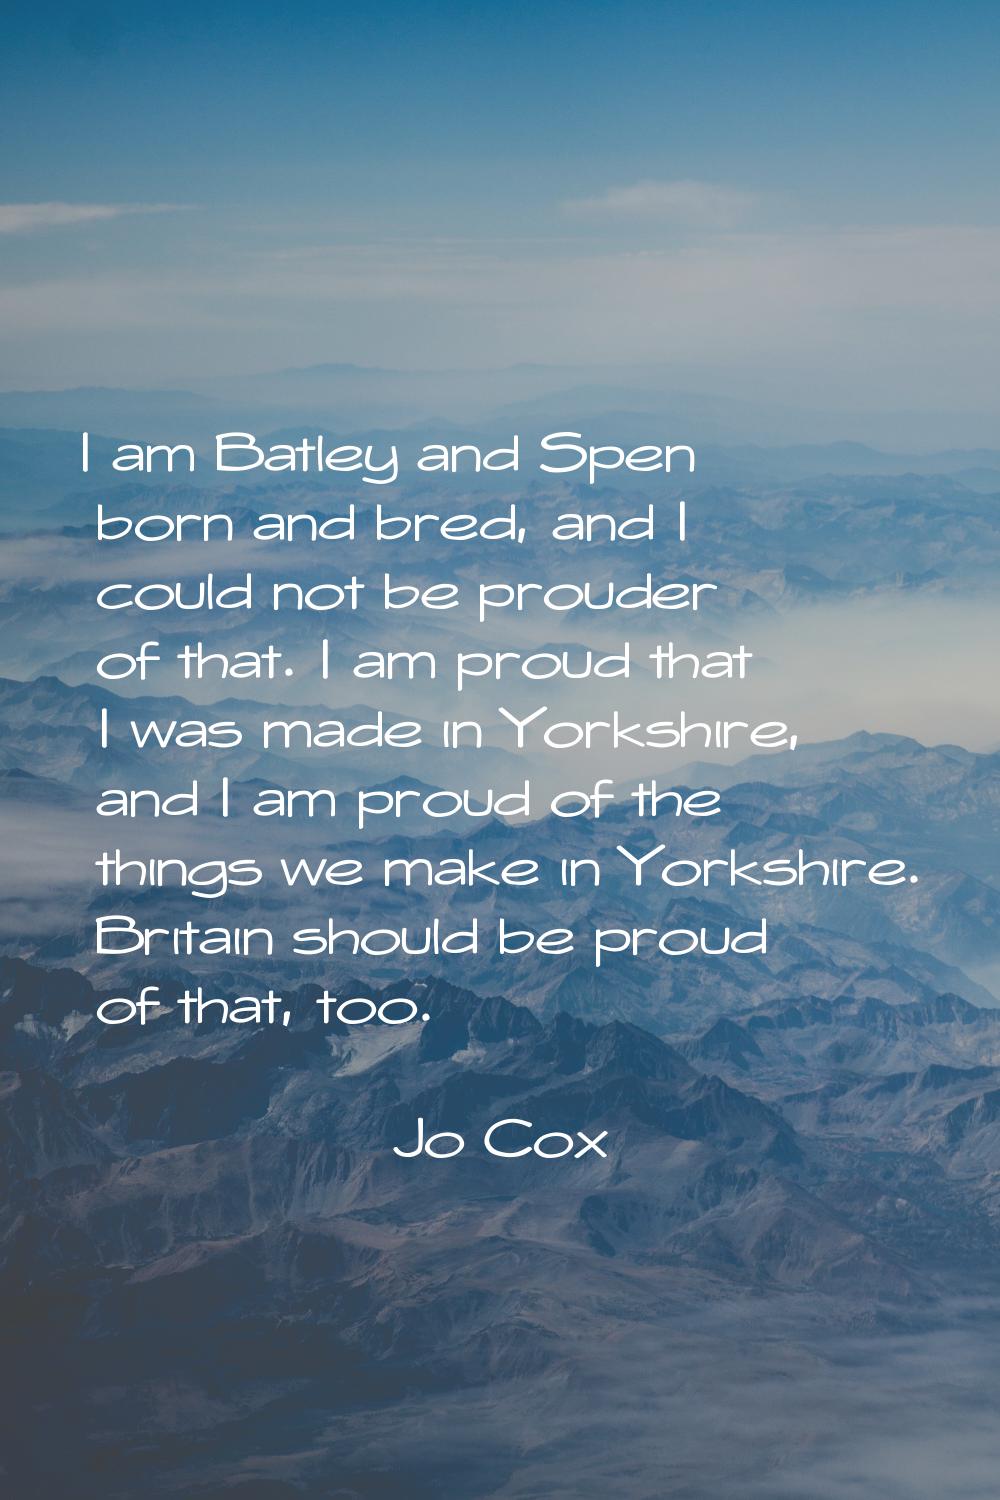 I am Batley and Spen born and bred, and I could not be prouder of that. I am proud that I was made 